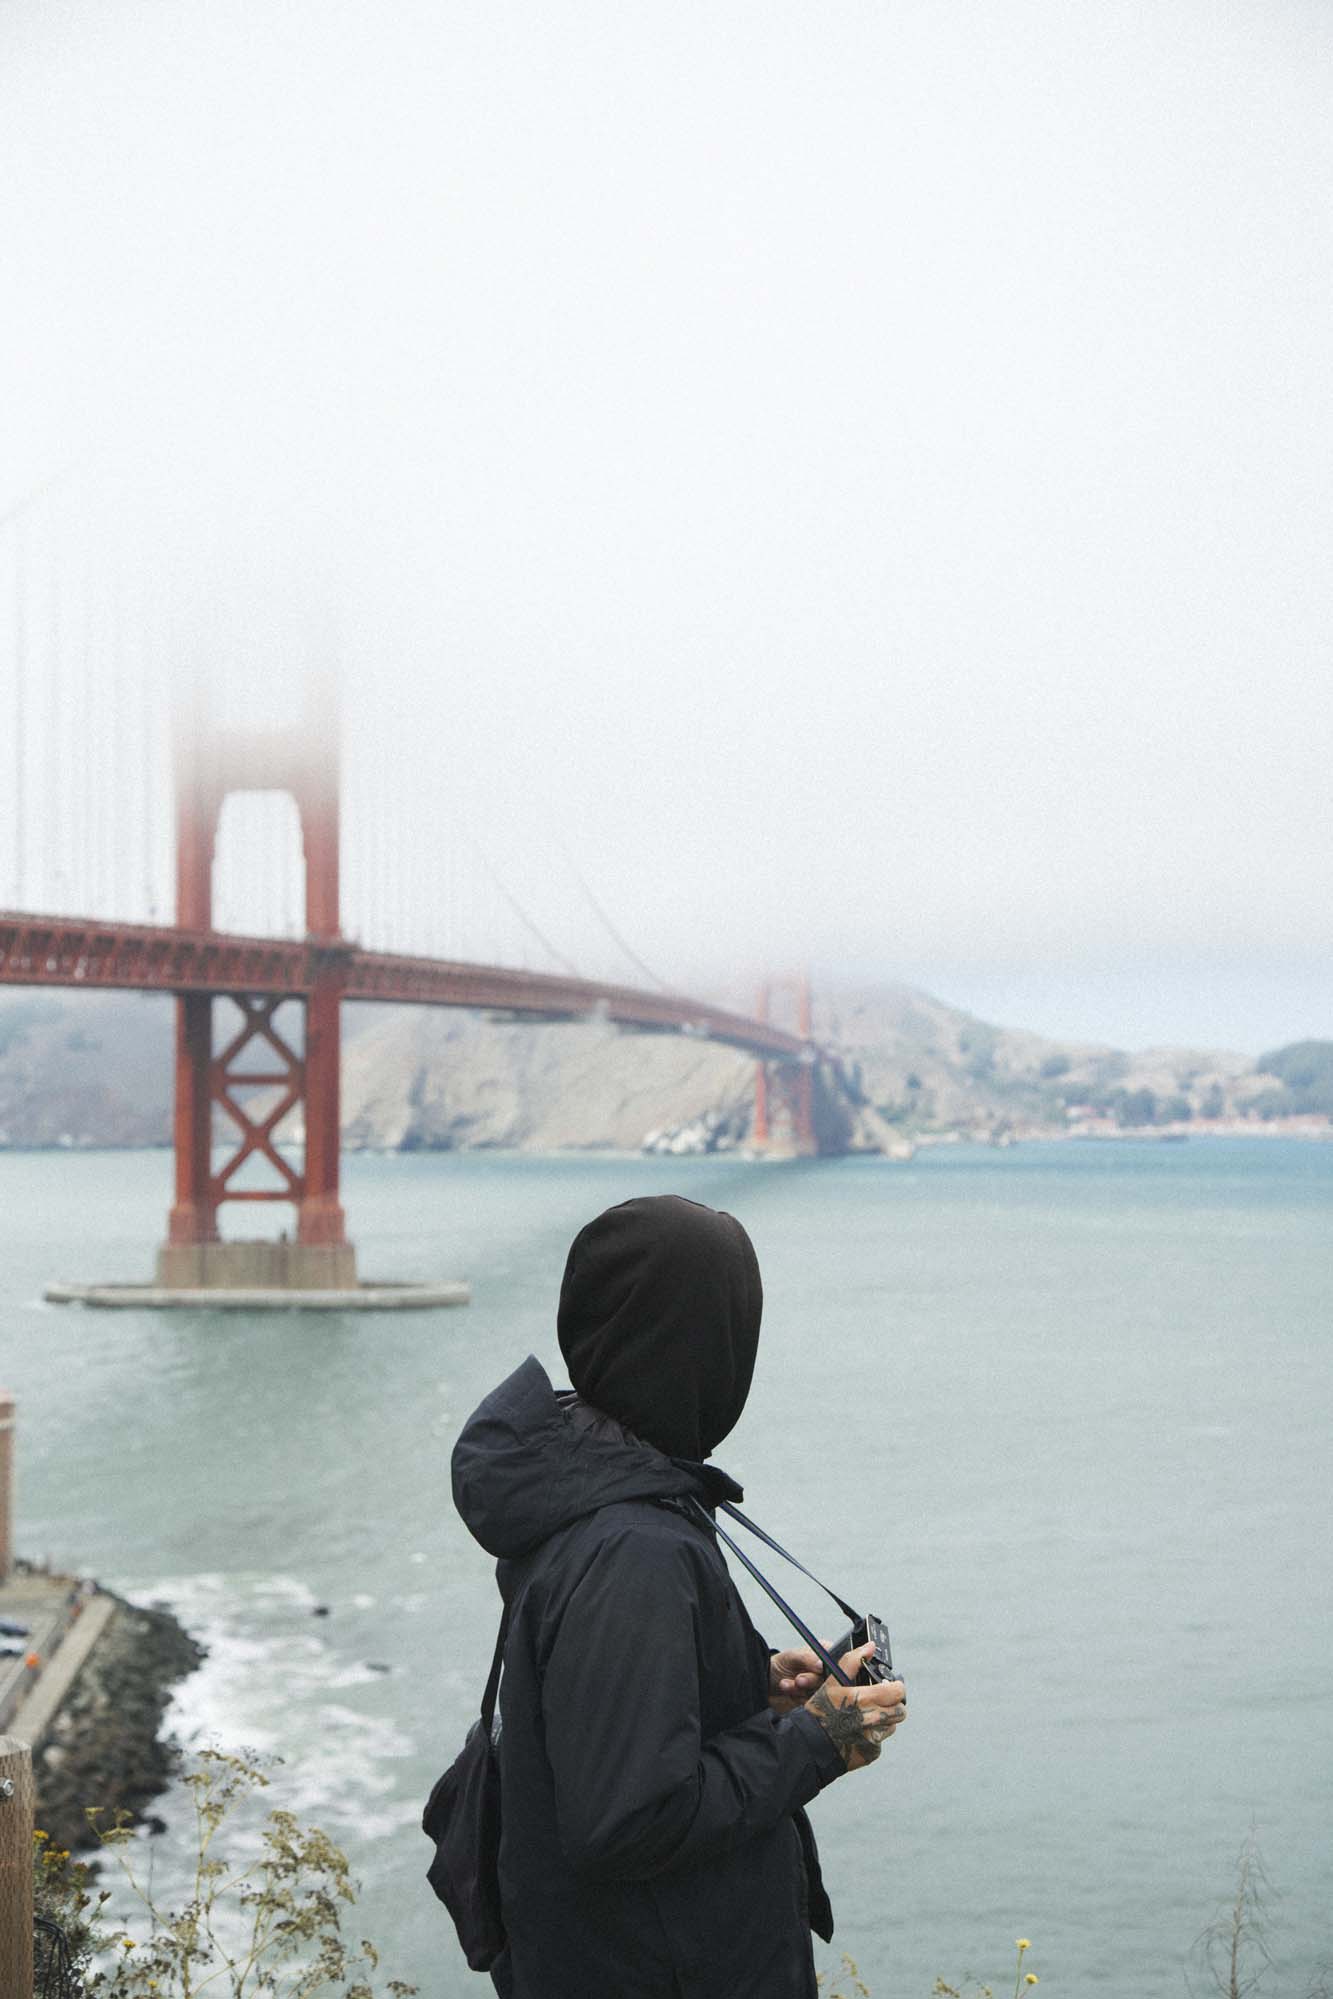 Person in black hoodie stands in front of large red bridge